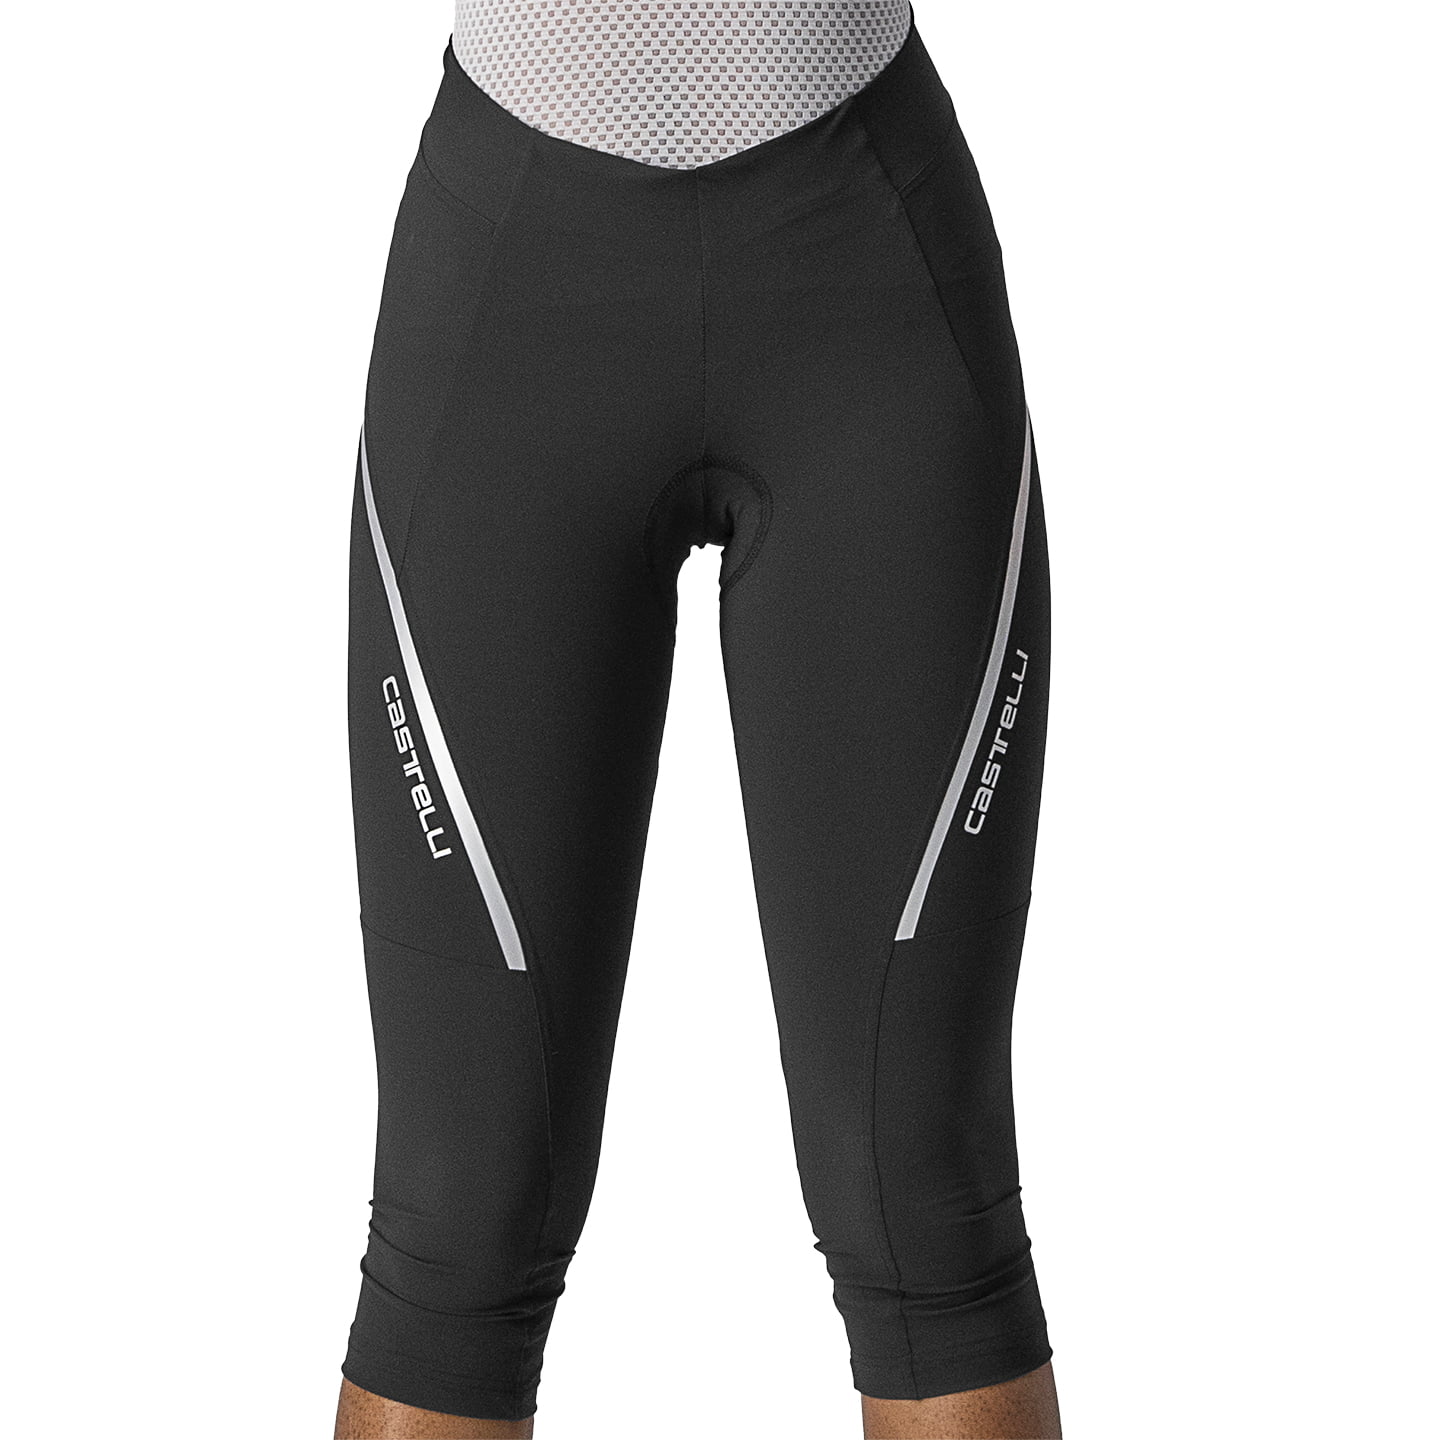 Velocissima 3 Women’s Knickers Women’s Knickers, size XL, Cycle trousers, Cycle gear